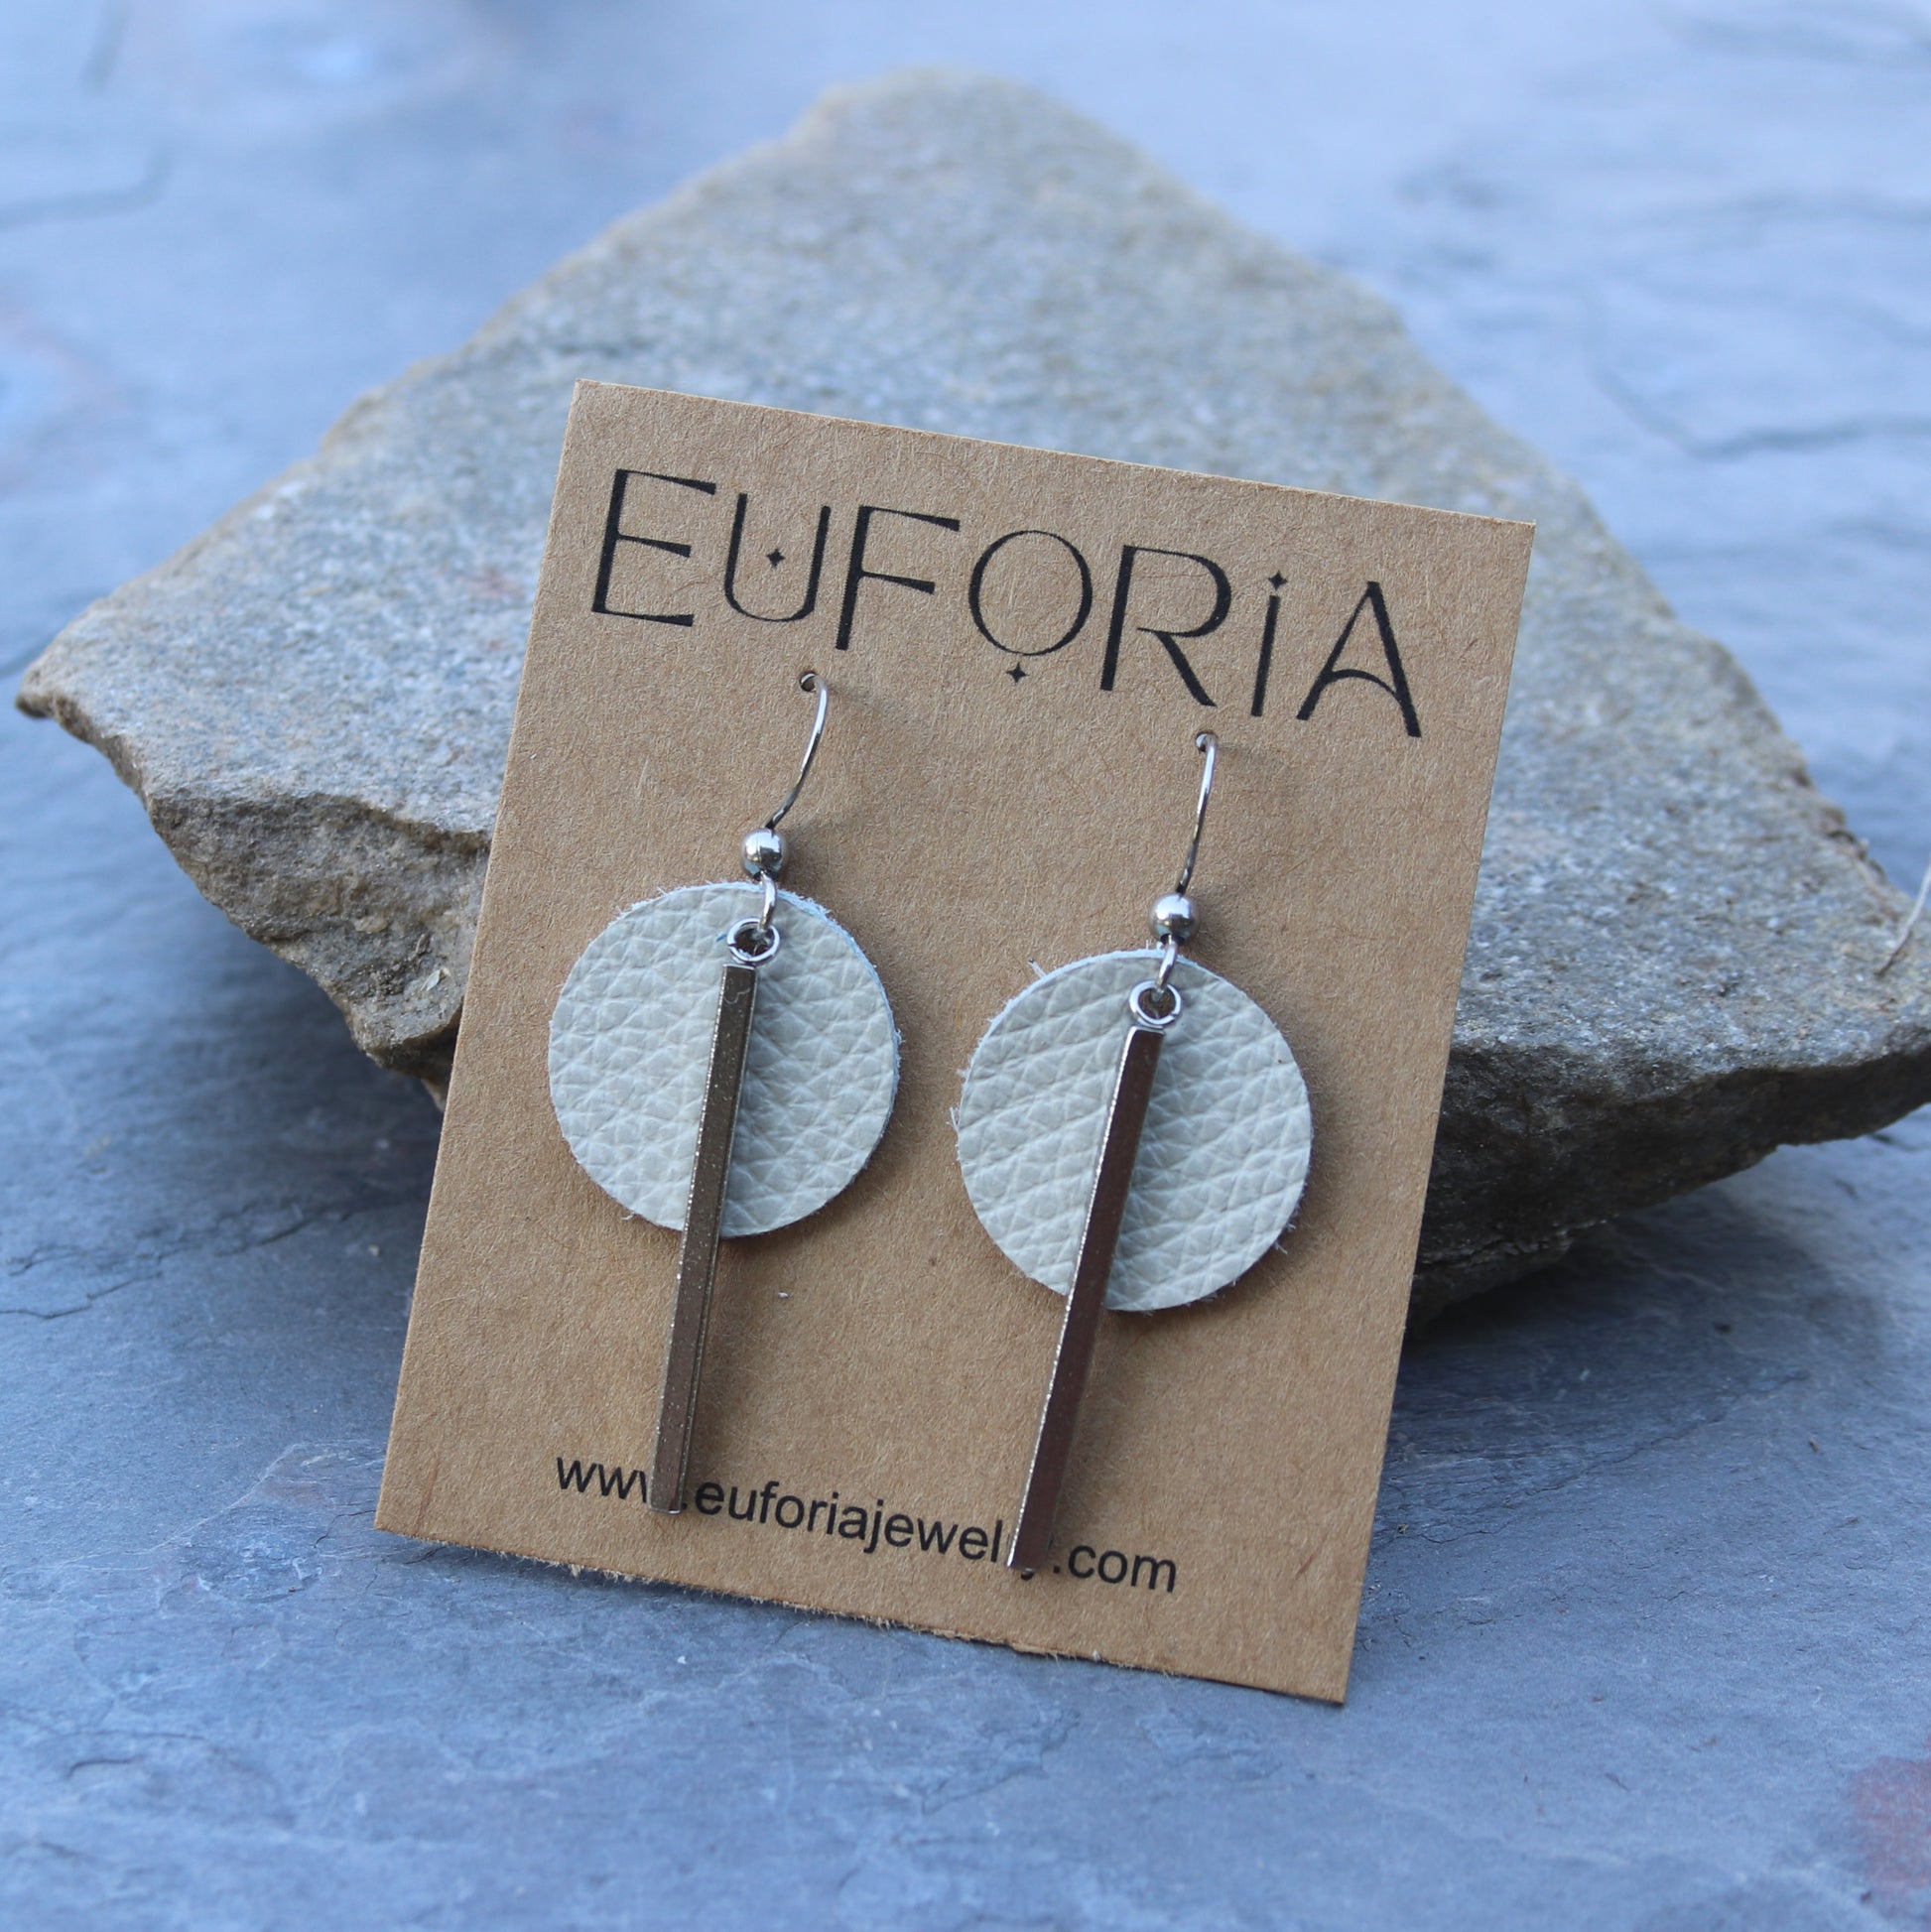 Cream leather .75" circle and stainless bar leather earrings